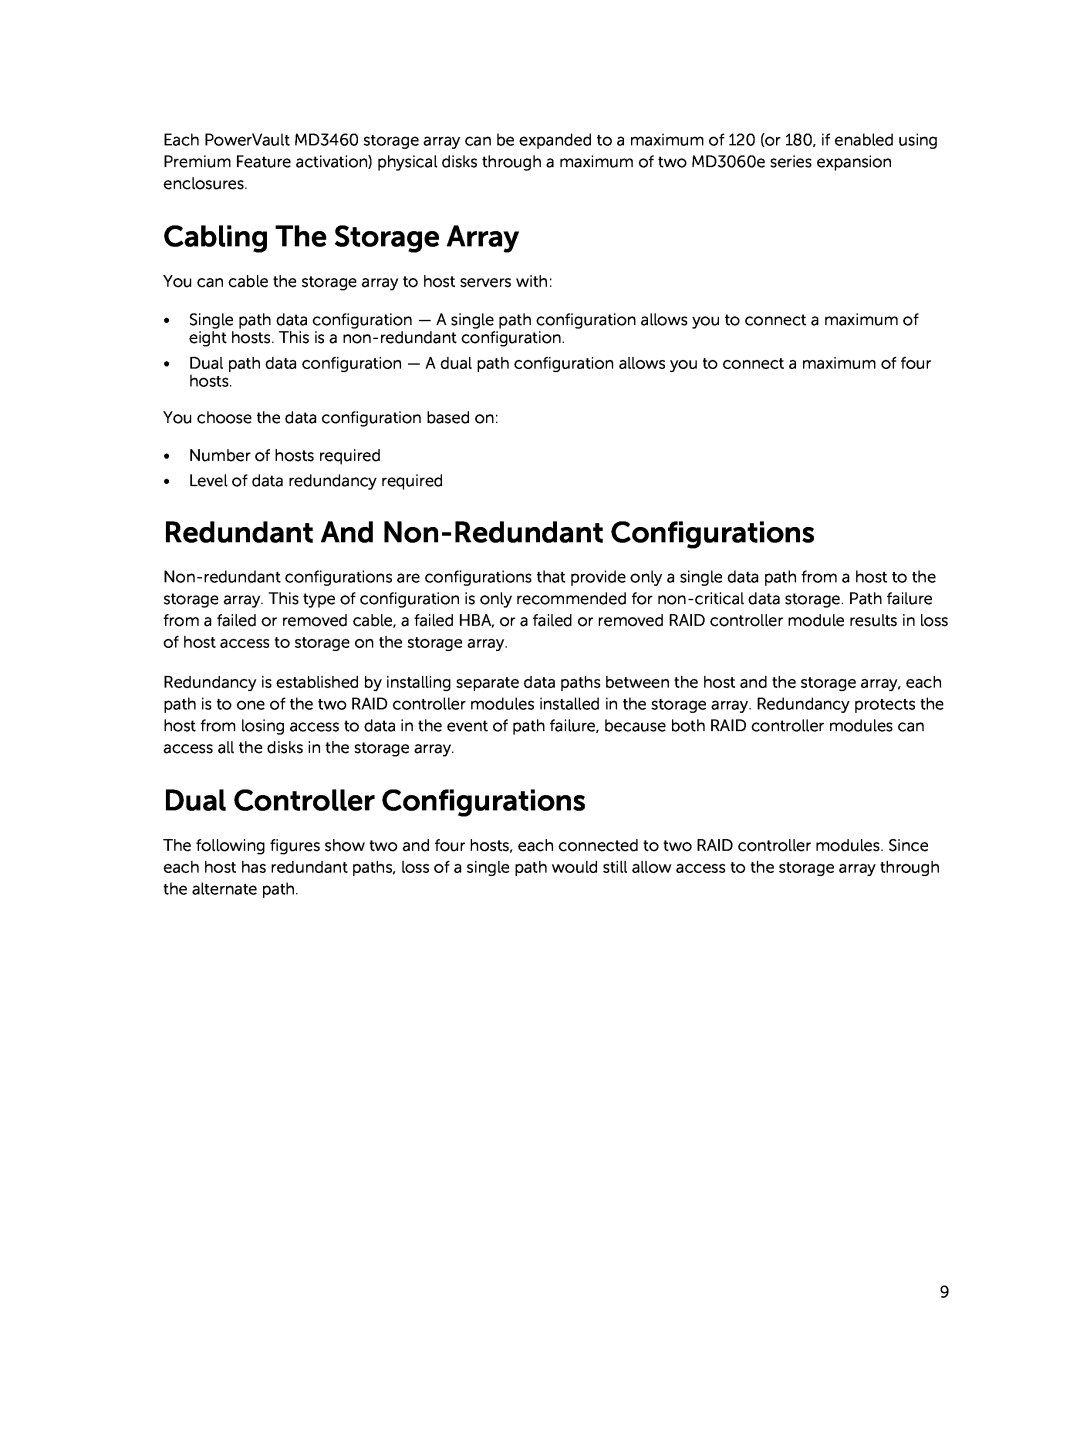 Dell MD3460 manual Cabling The Storage Array, Redundant And Non-RedundantConfigurations, Dual Controller Configurations 